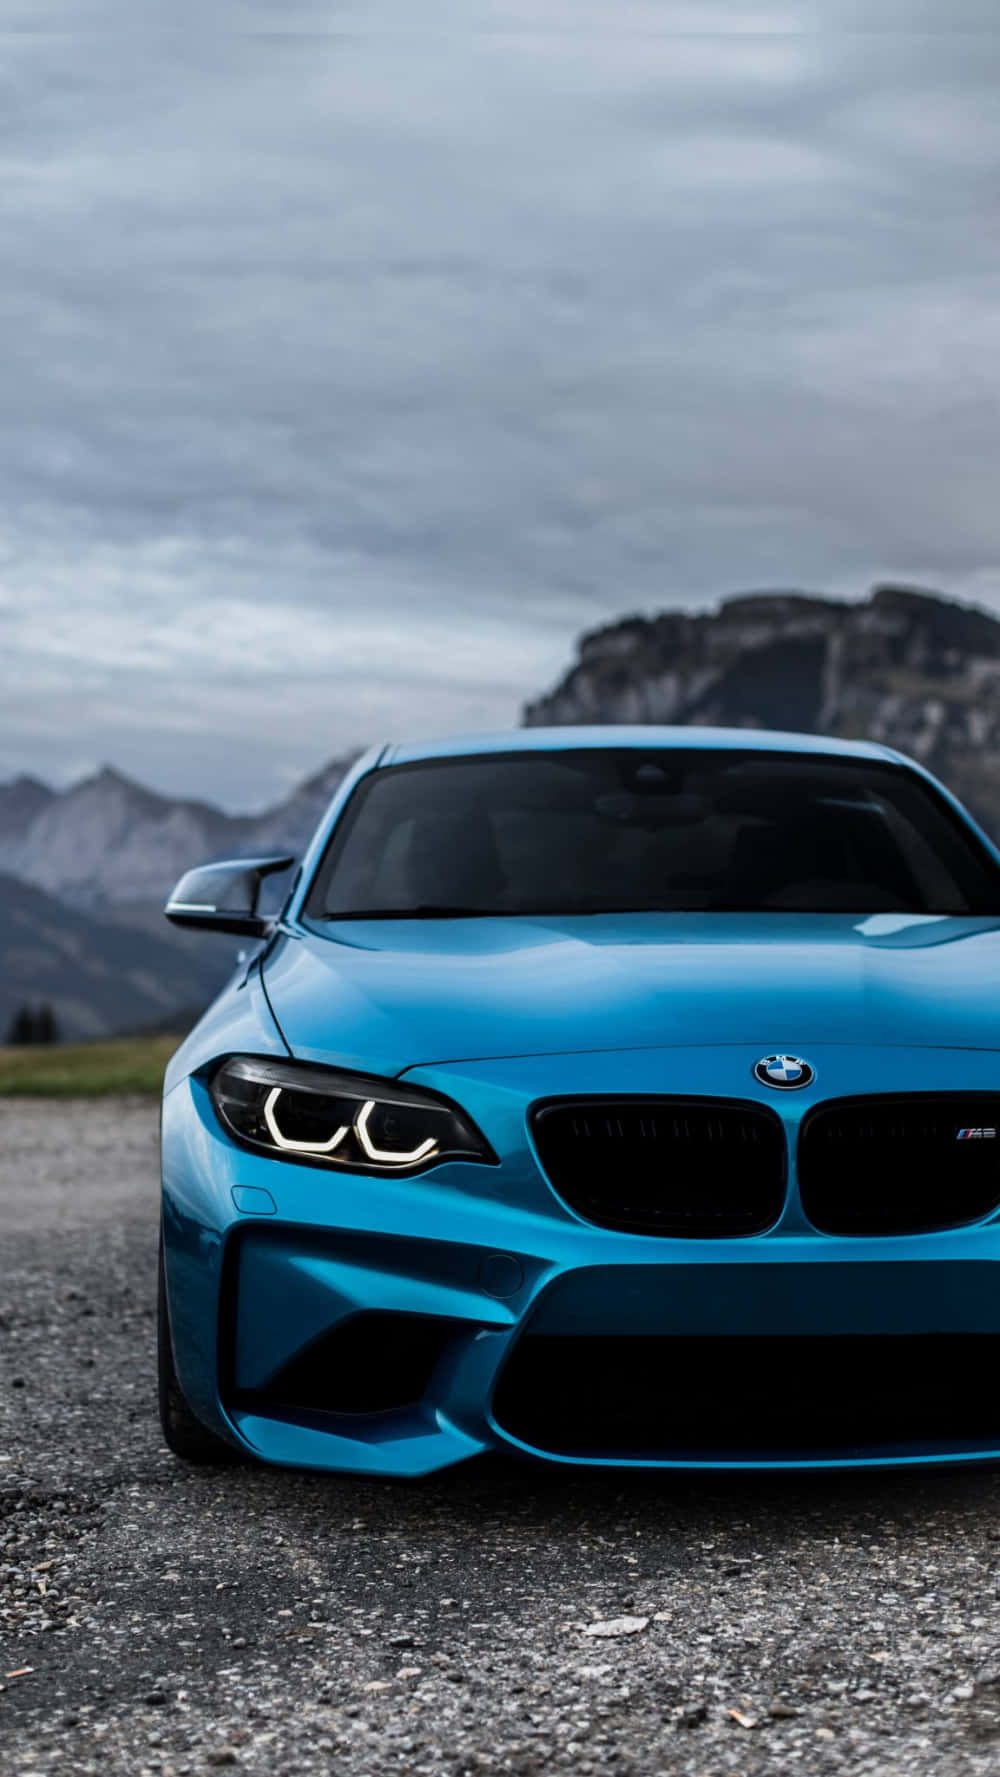 Enjoy the sophistication and luxury of the BMW experience with a sleek, modern iPhone Wallpaper